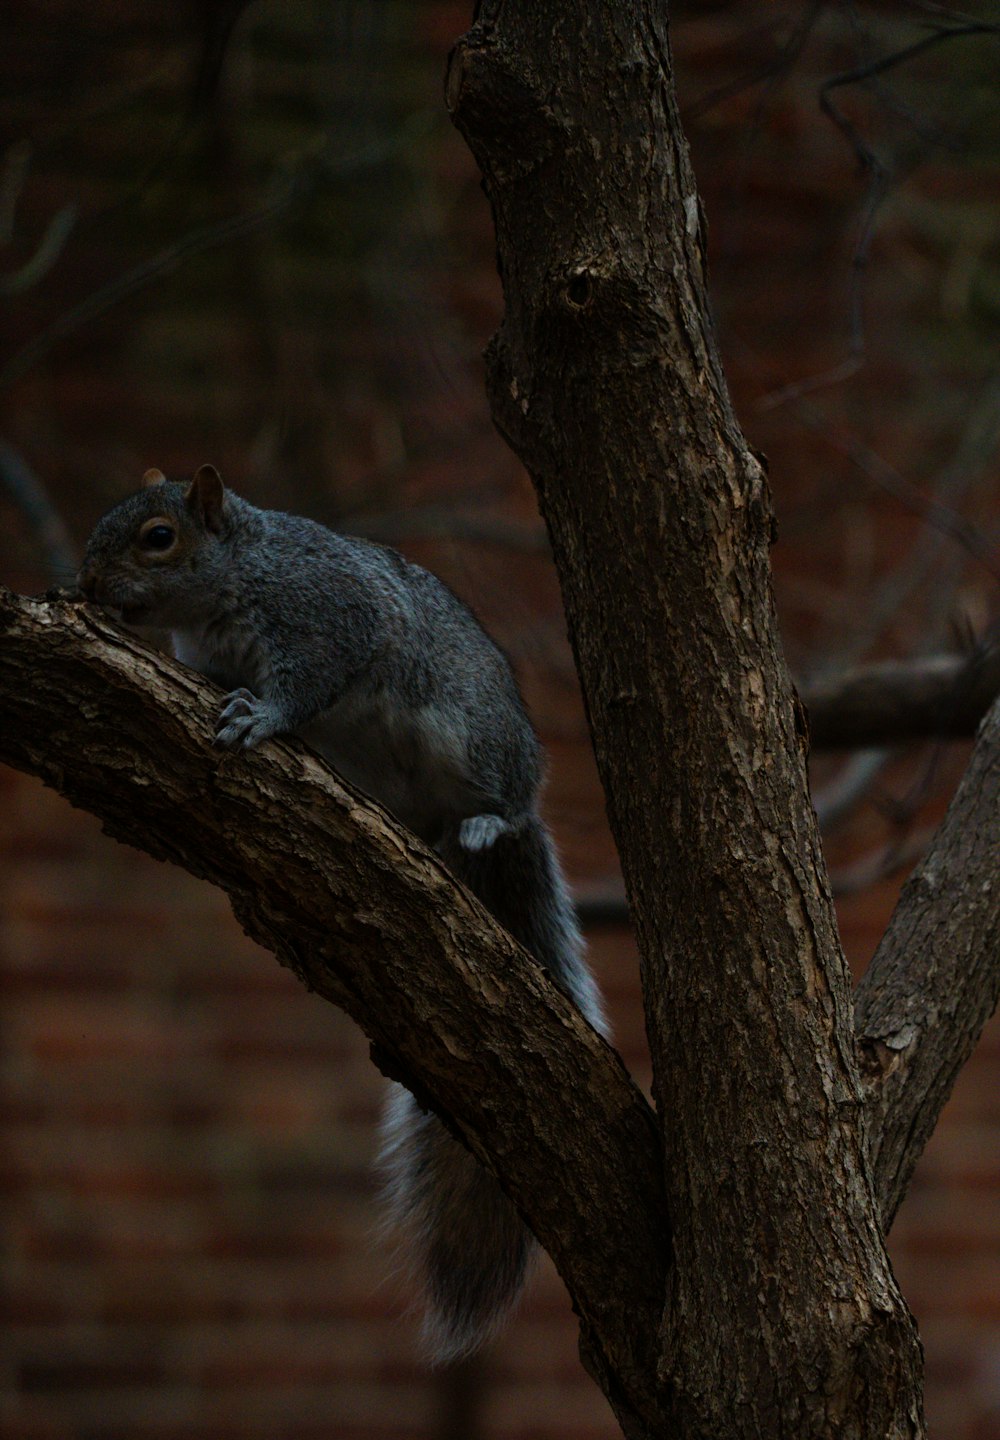 a squirrel sitting on a branch of a tree